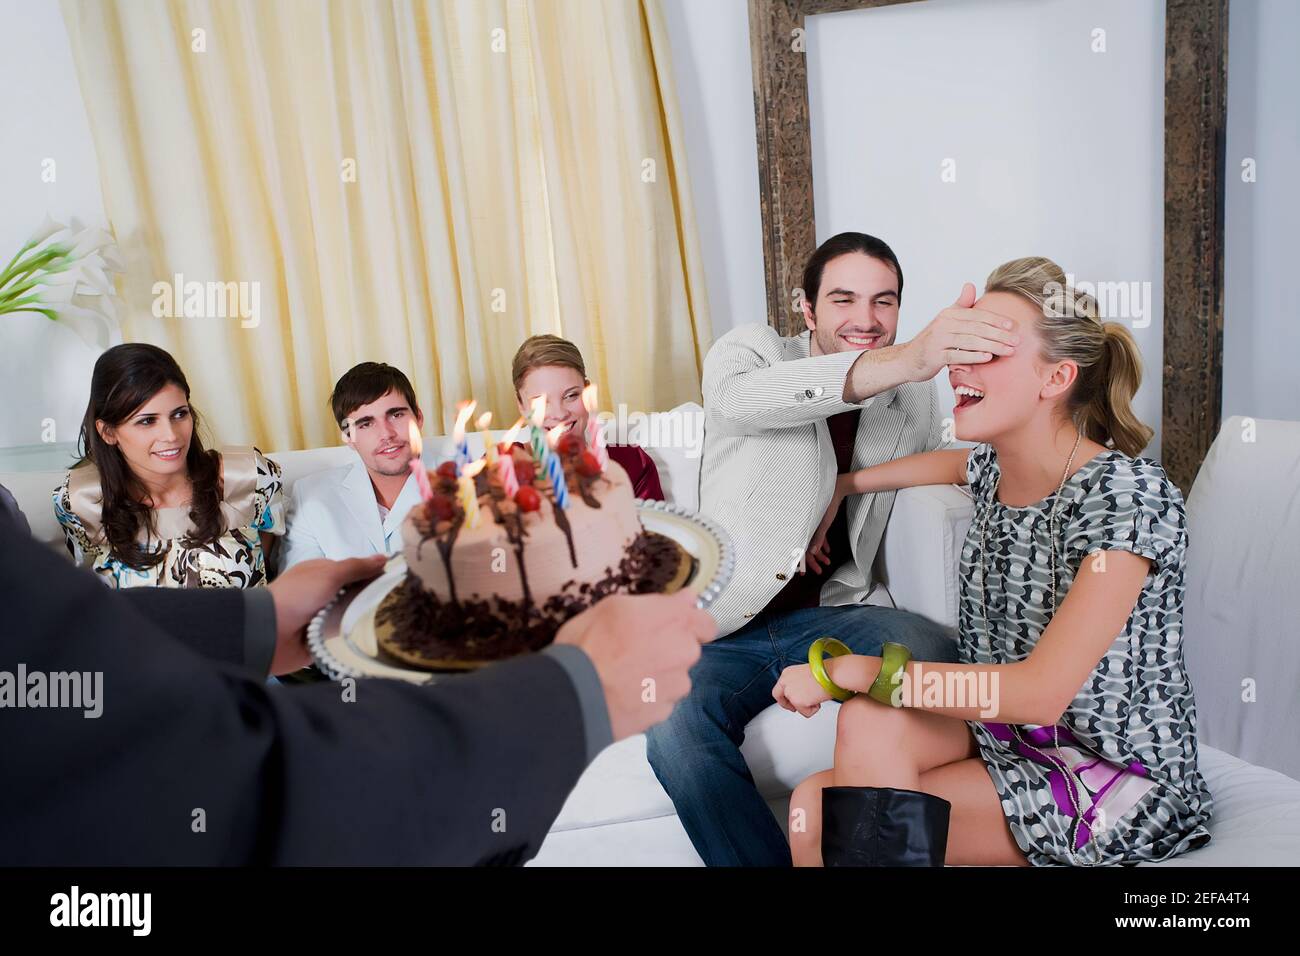 Young woman celebrating a birthday party with her friends Stock Photo